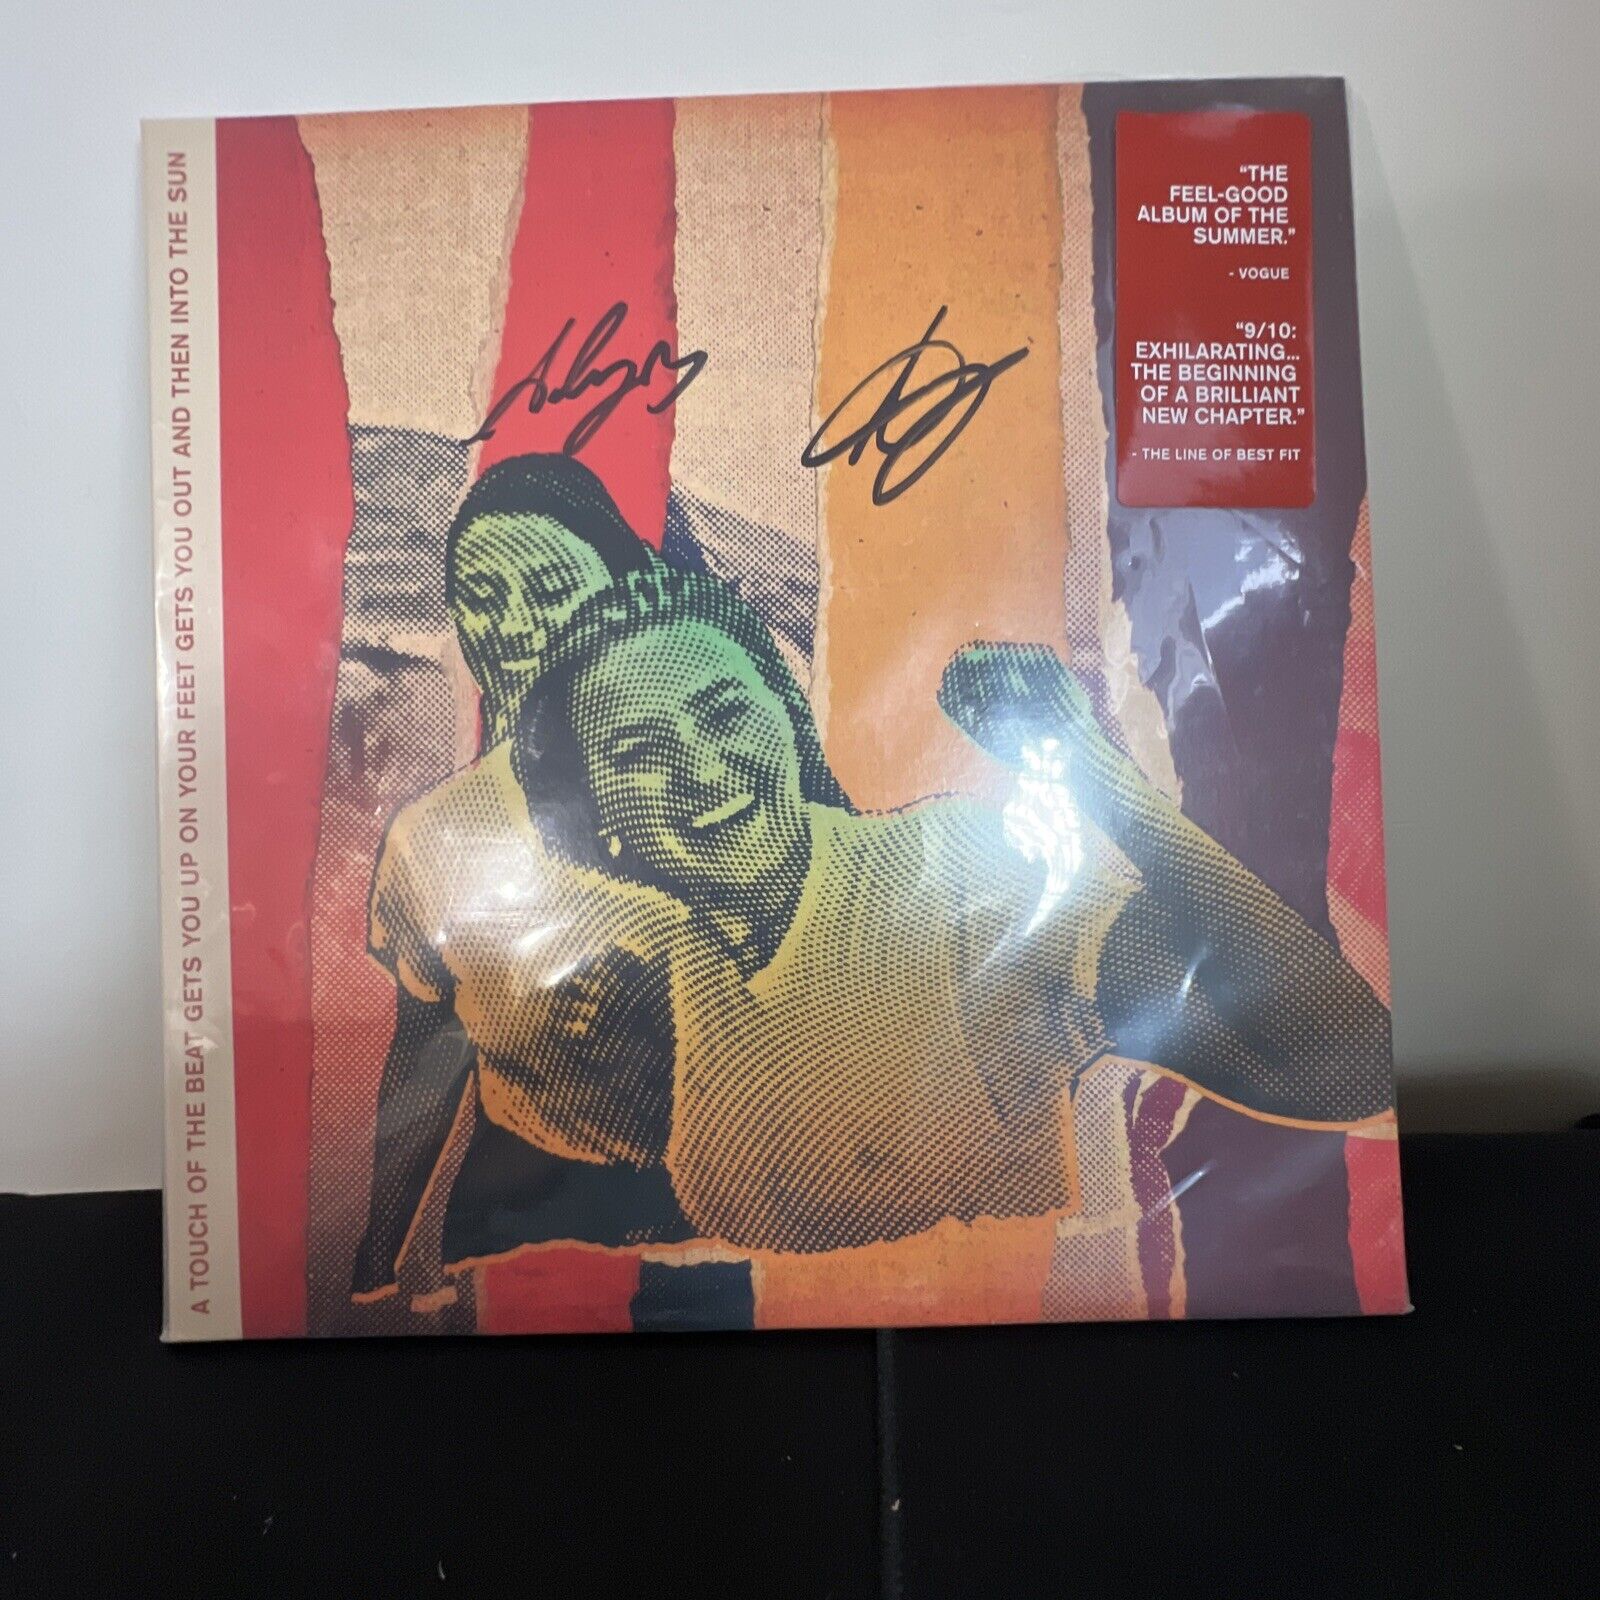 Aly and AJ - A Touch Of The Beat SIGNED 2LP Orange Sunburst MINT Condition NEW